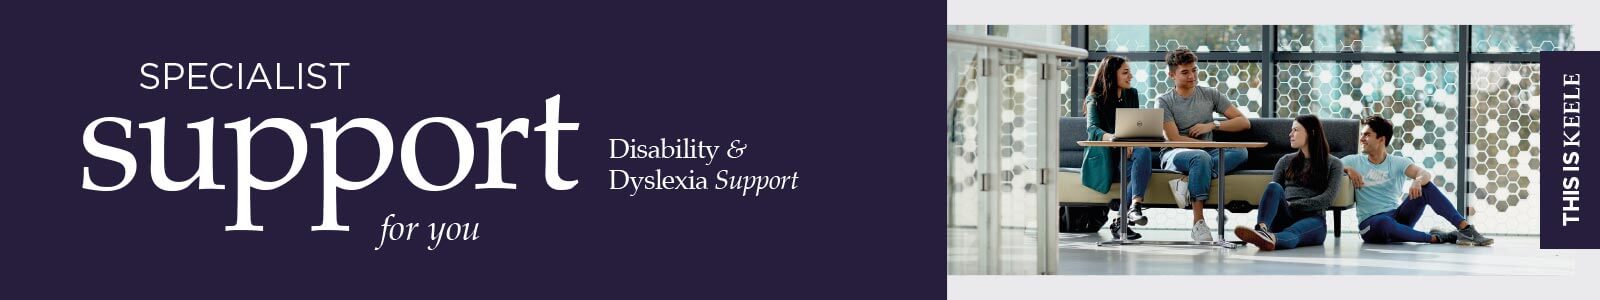 Specialist support for you - Disability and Dyslexia Support